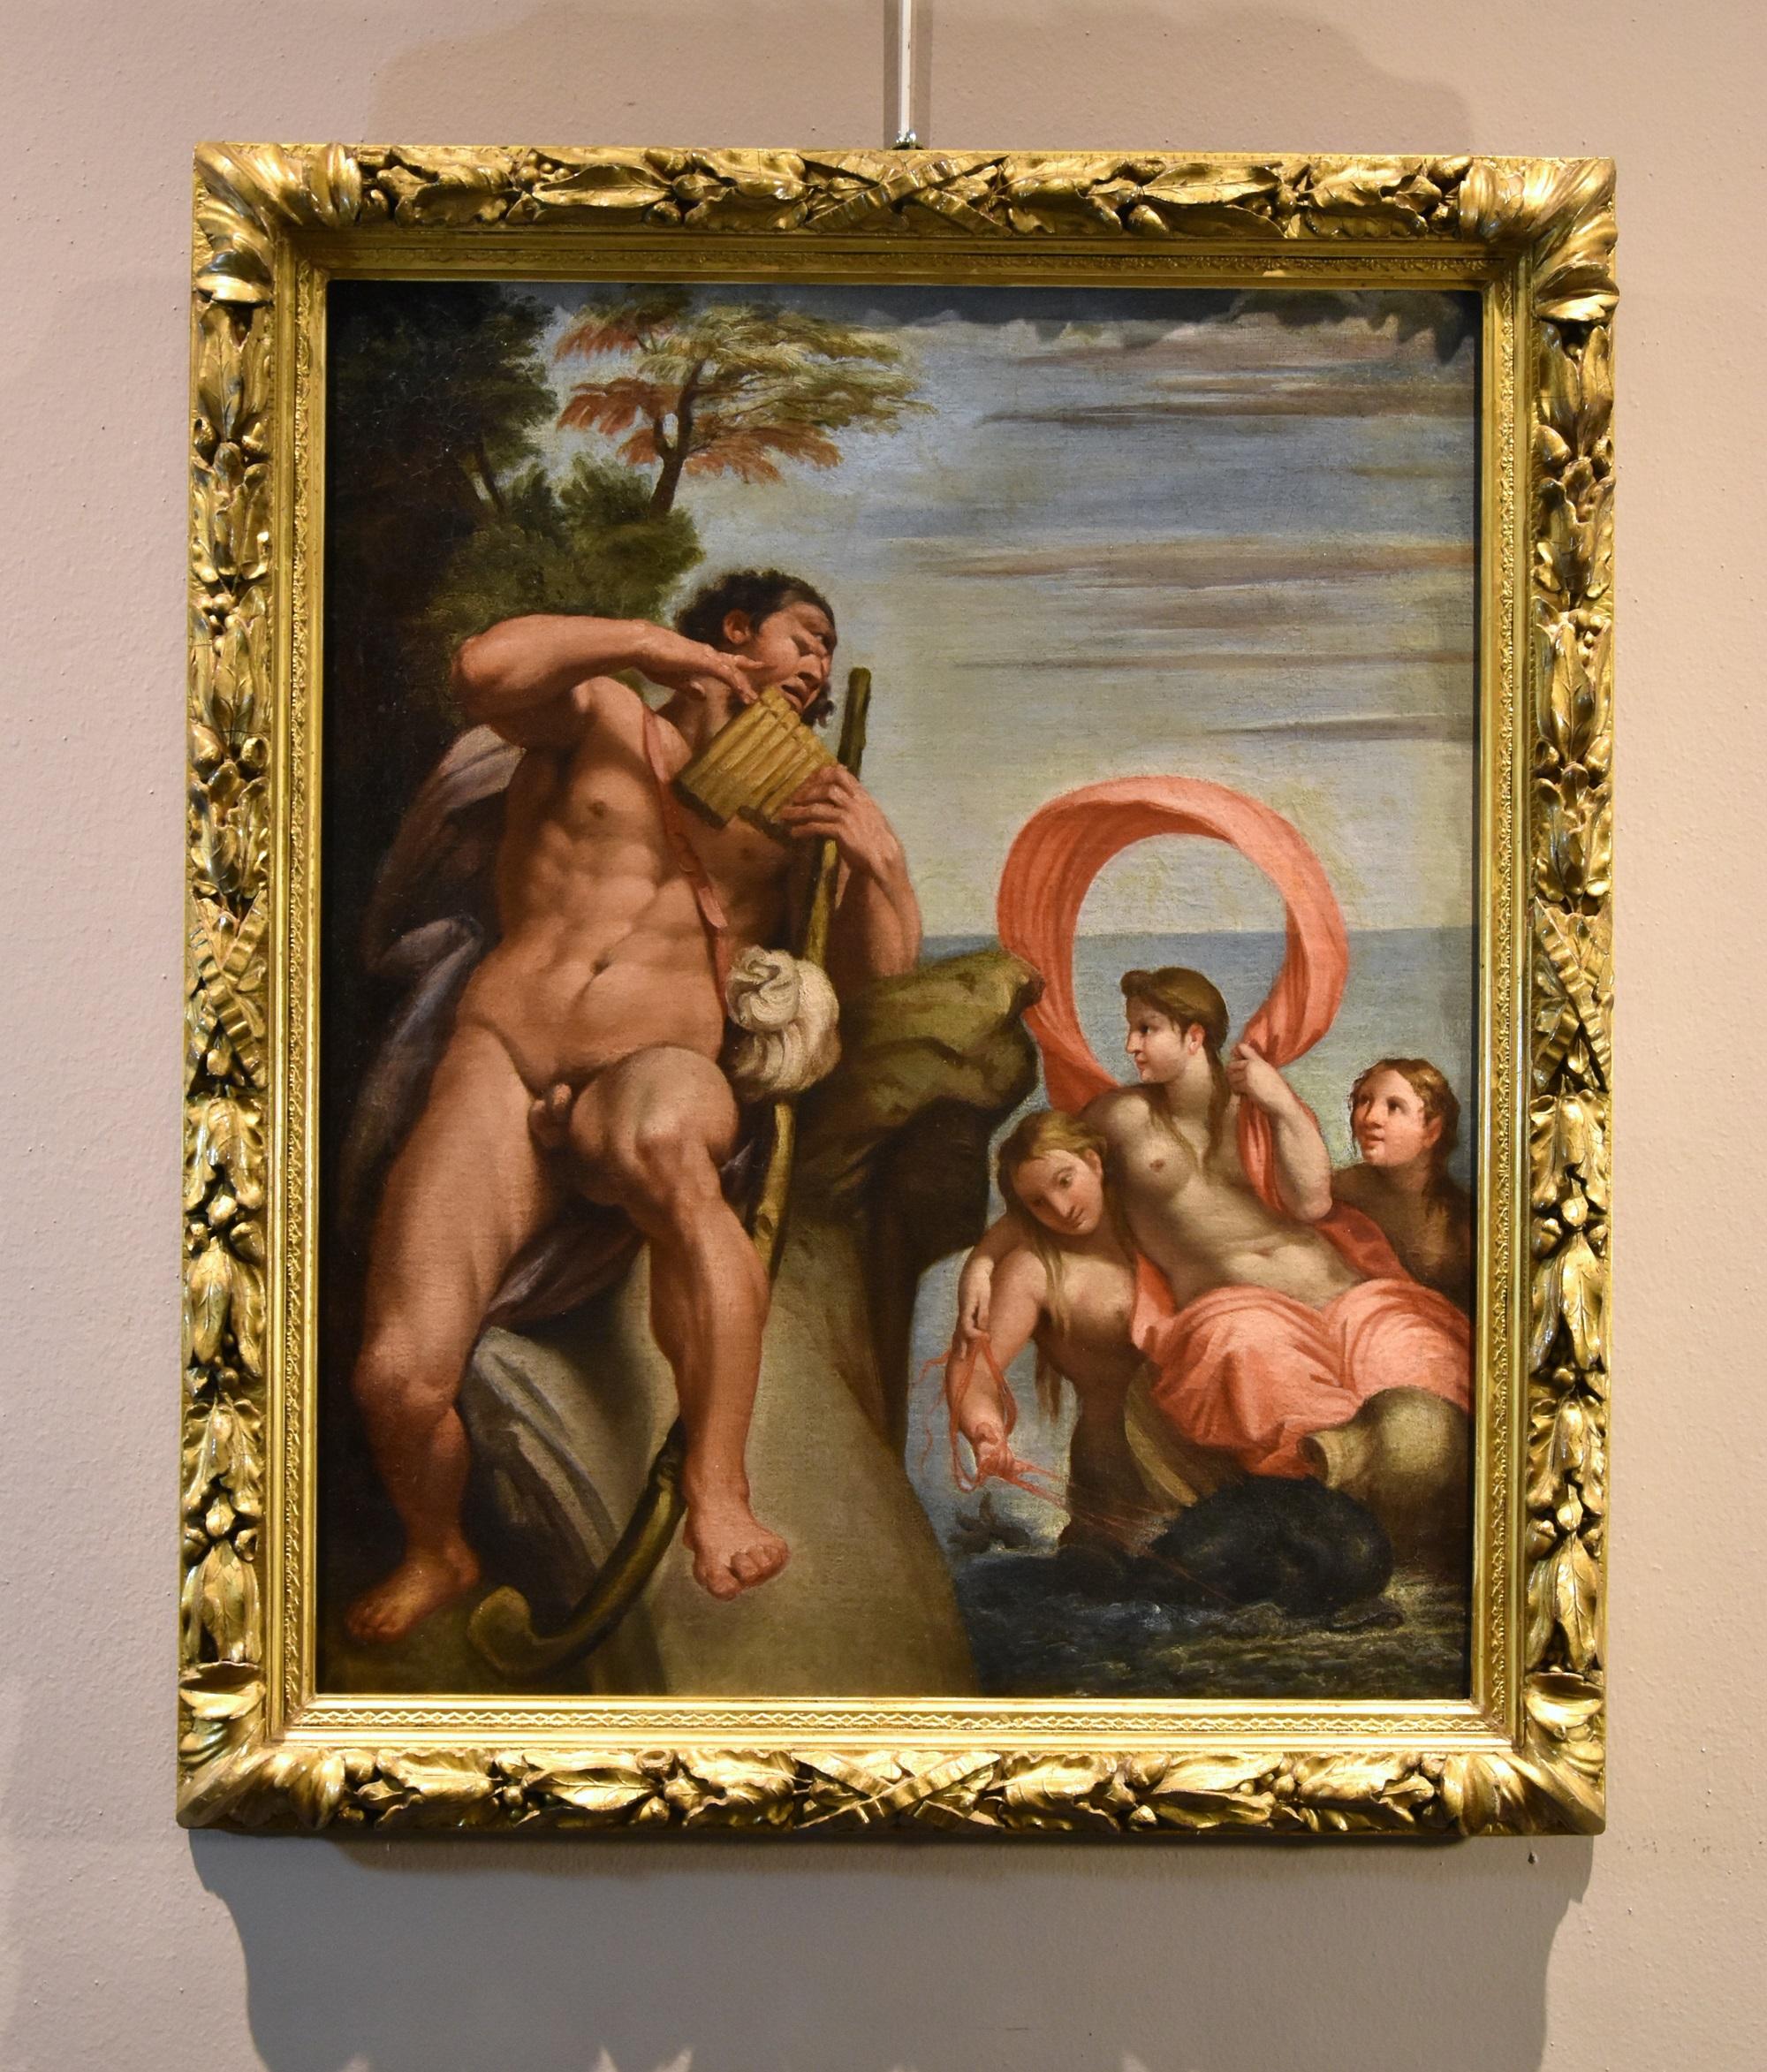 Polyphemus Galatea Carracci Paint 17th Century Oil on canvas Old master Italy - Old Masters Painting by Annibale Carracci (bologna, 1560 - Rome, 1609)